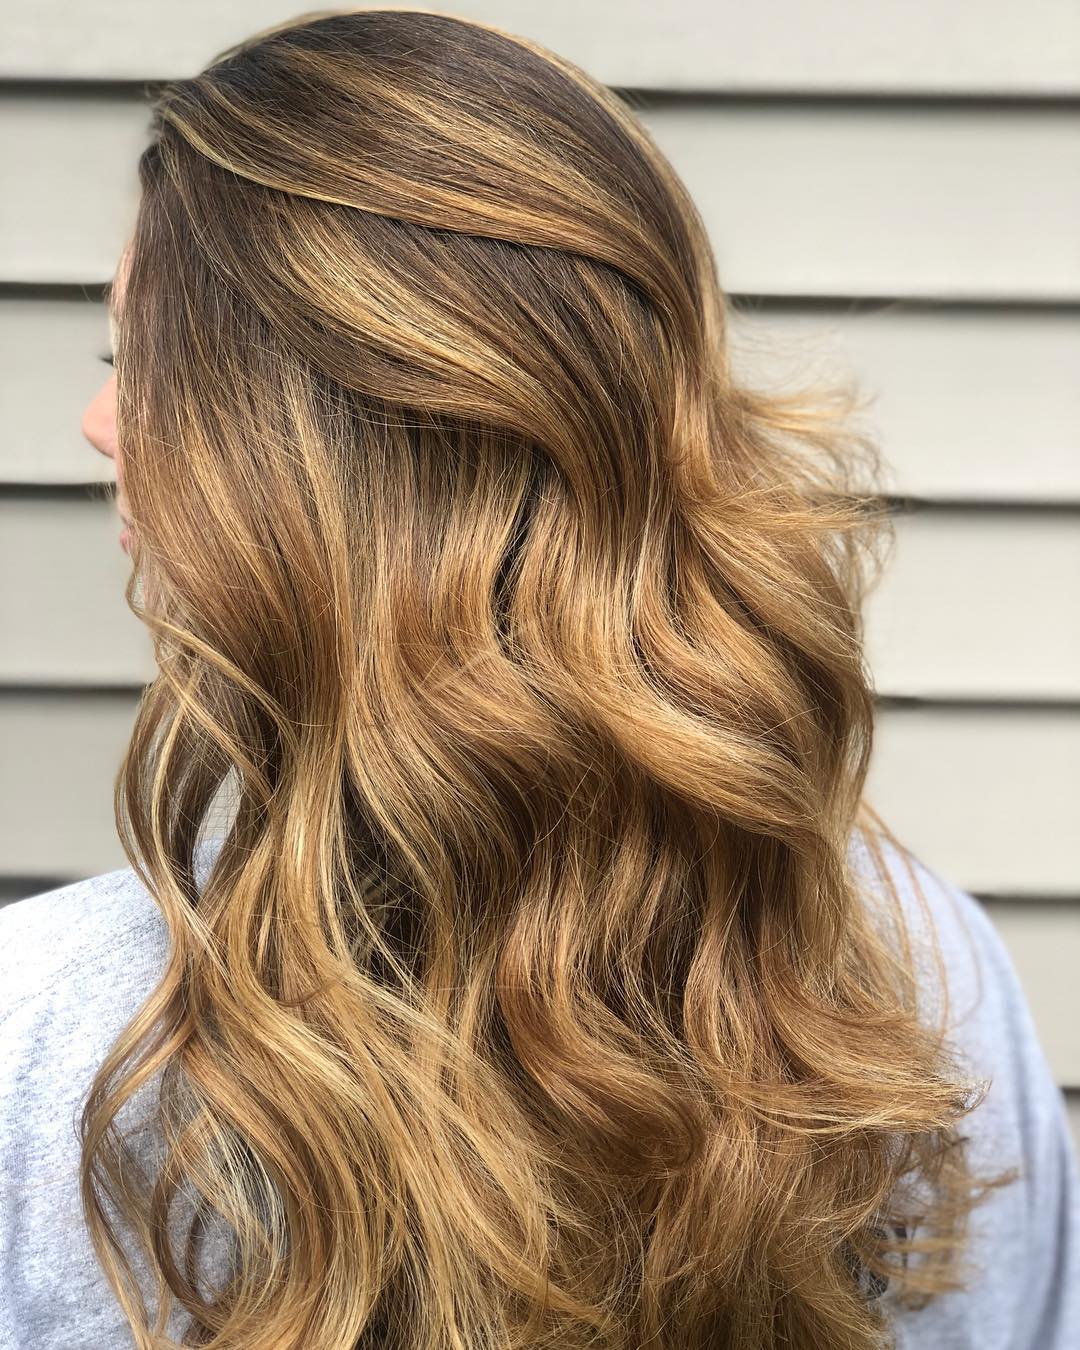 Classic Blonde and Caramel Highlights